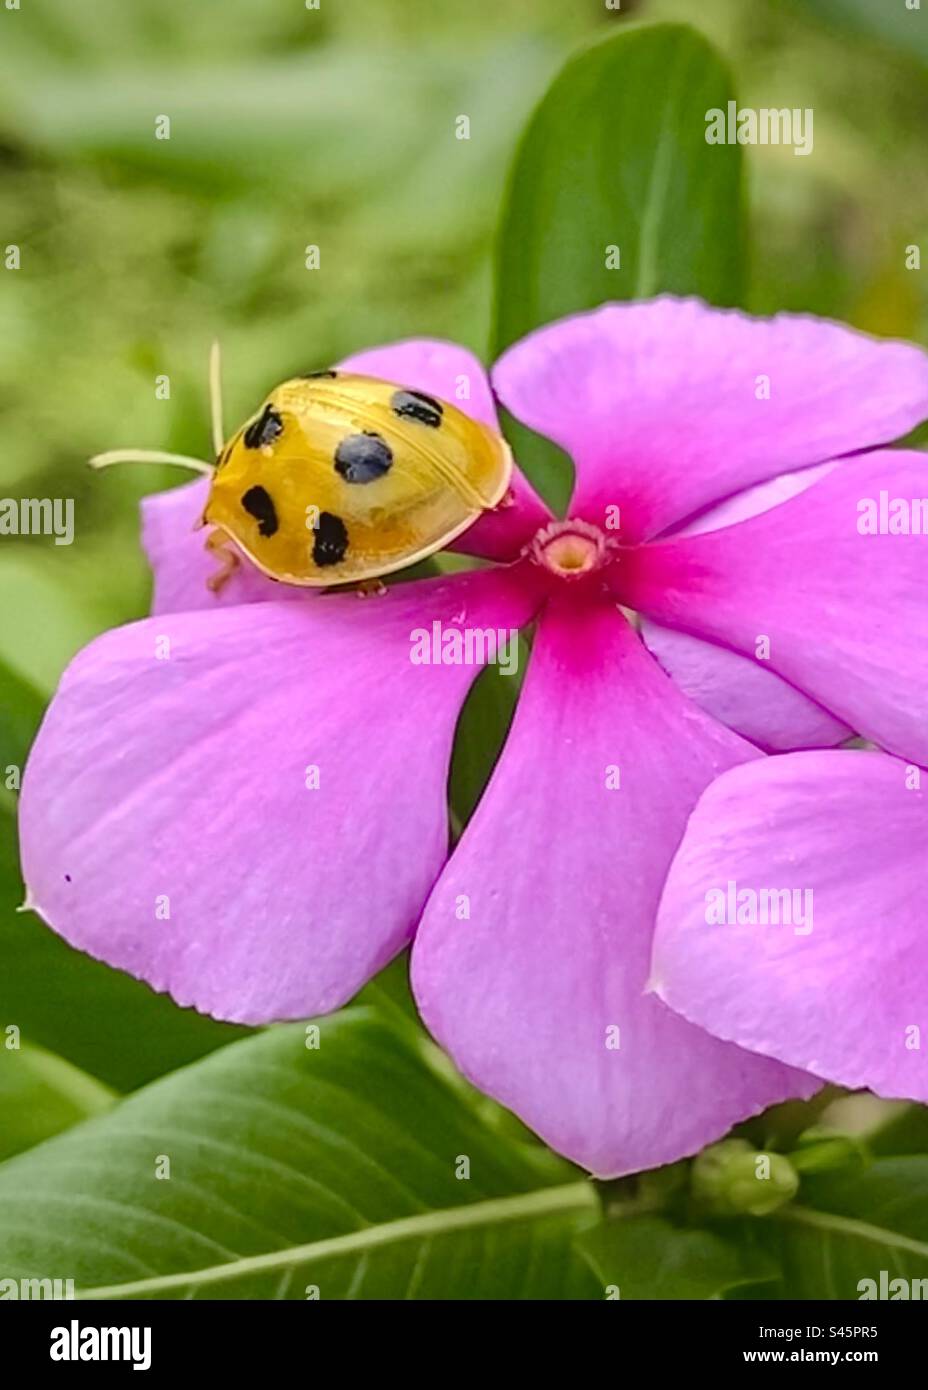 Outdoors photography of the little ladybug’s on the pink flower. Stock Photo